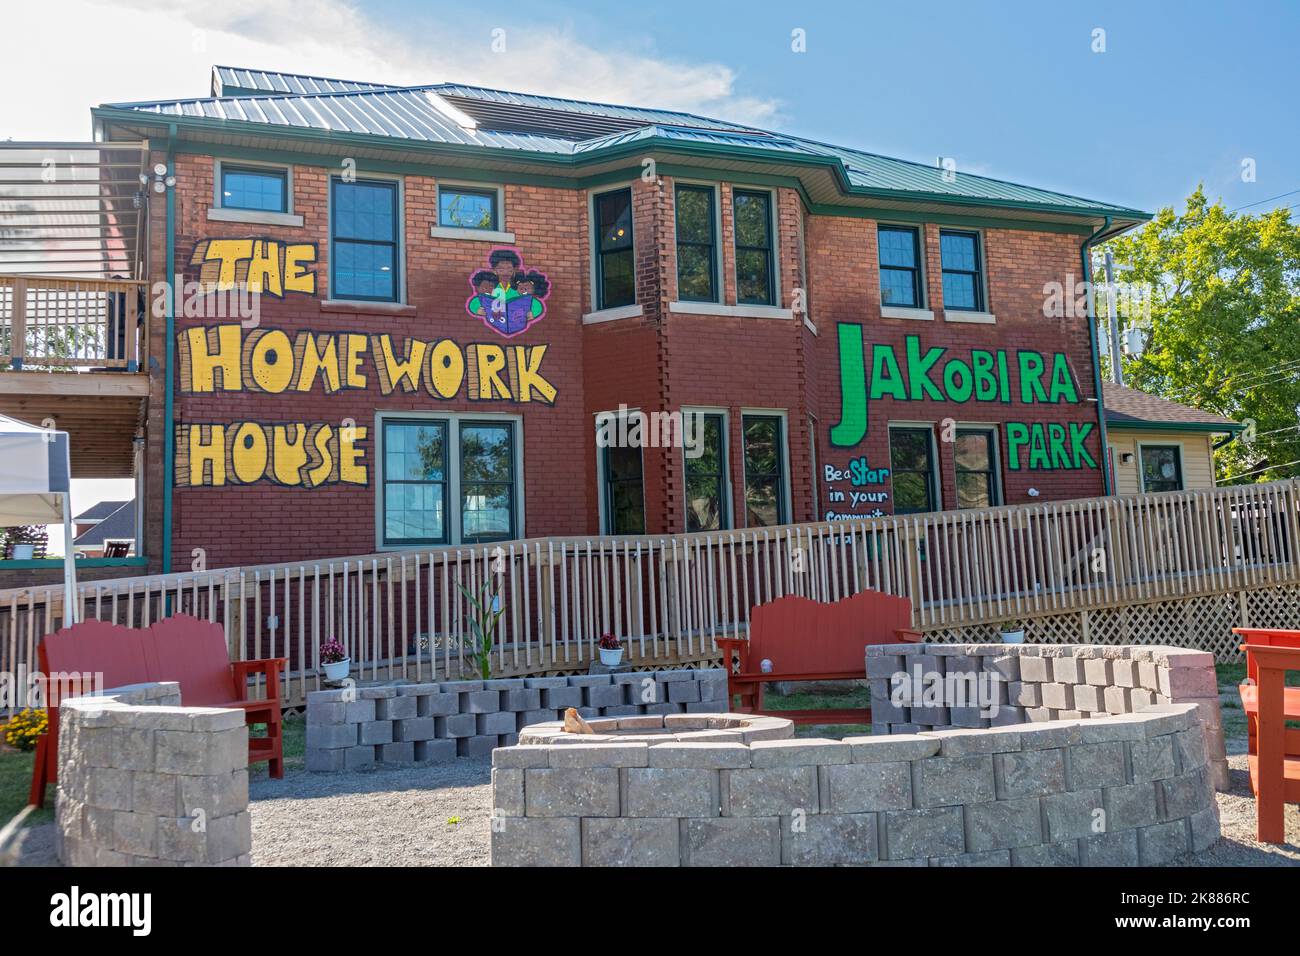 Highland Park, Michigan - The Homework House helps students in this low-income community with tutoring, meals, homework help, and GED testing. It has Stock Photo